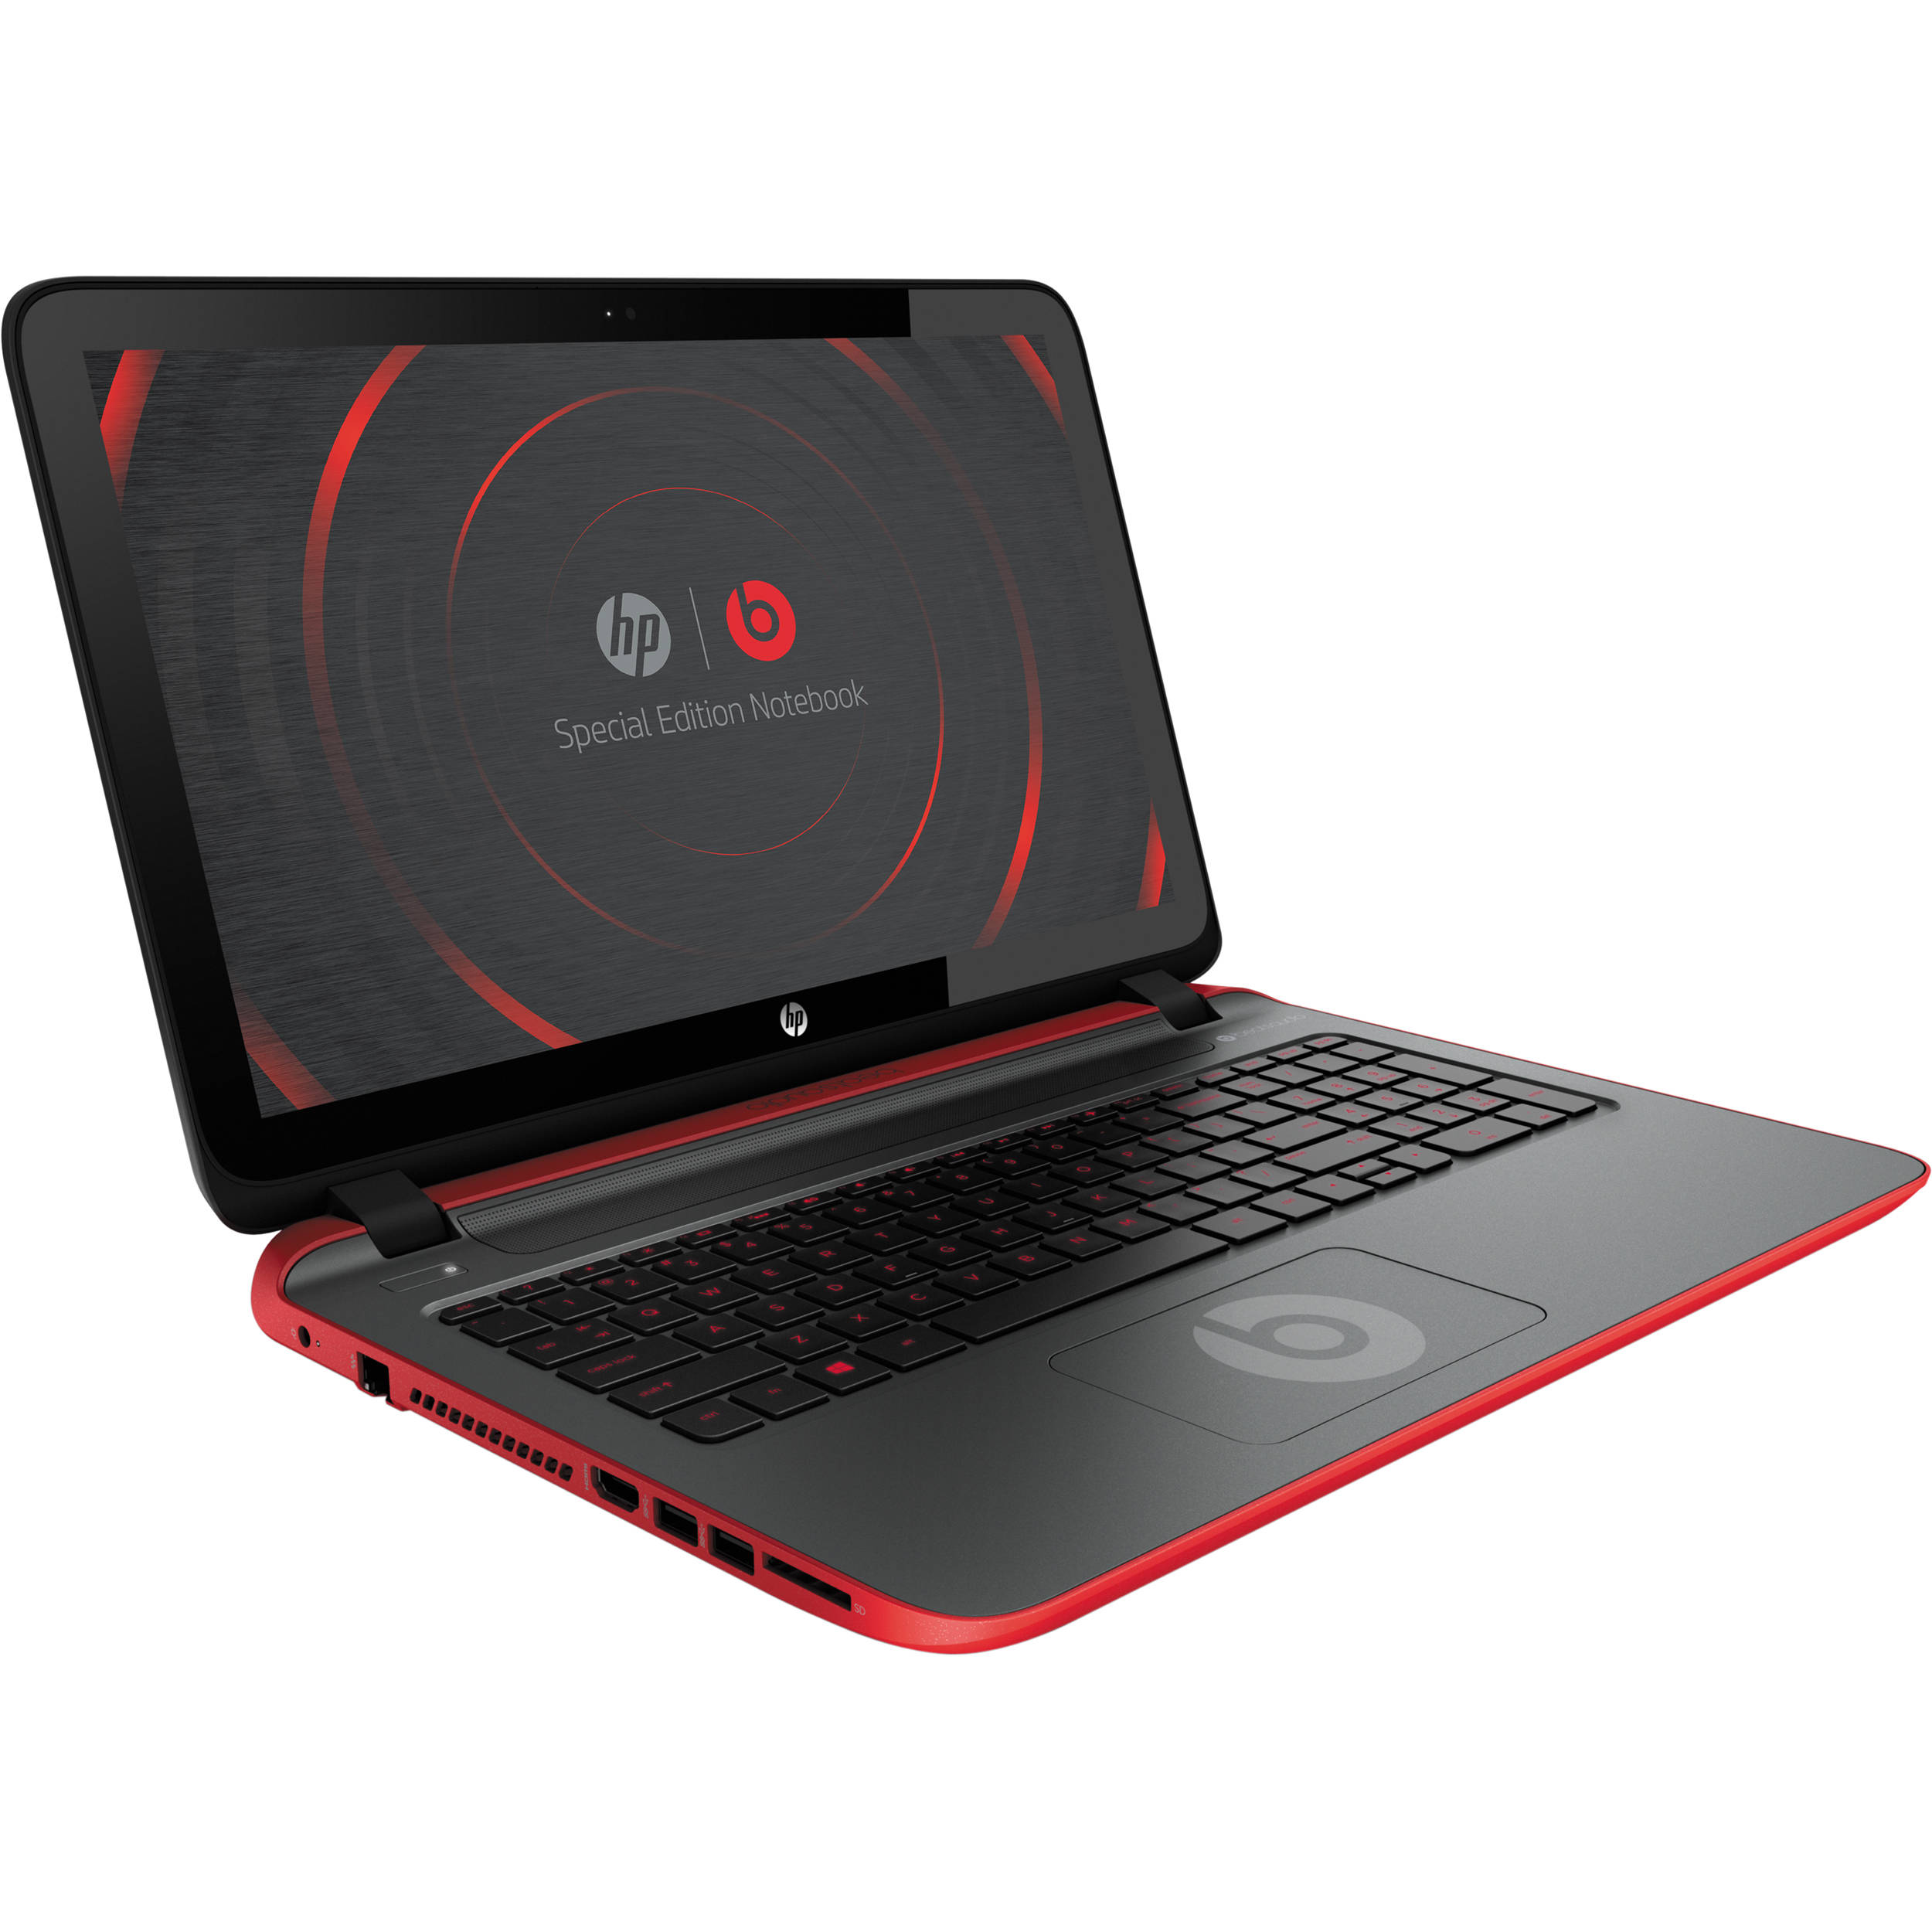 Beats Special Edition 15-p000 Notebook PC